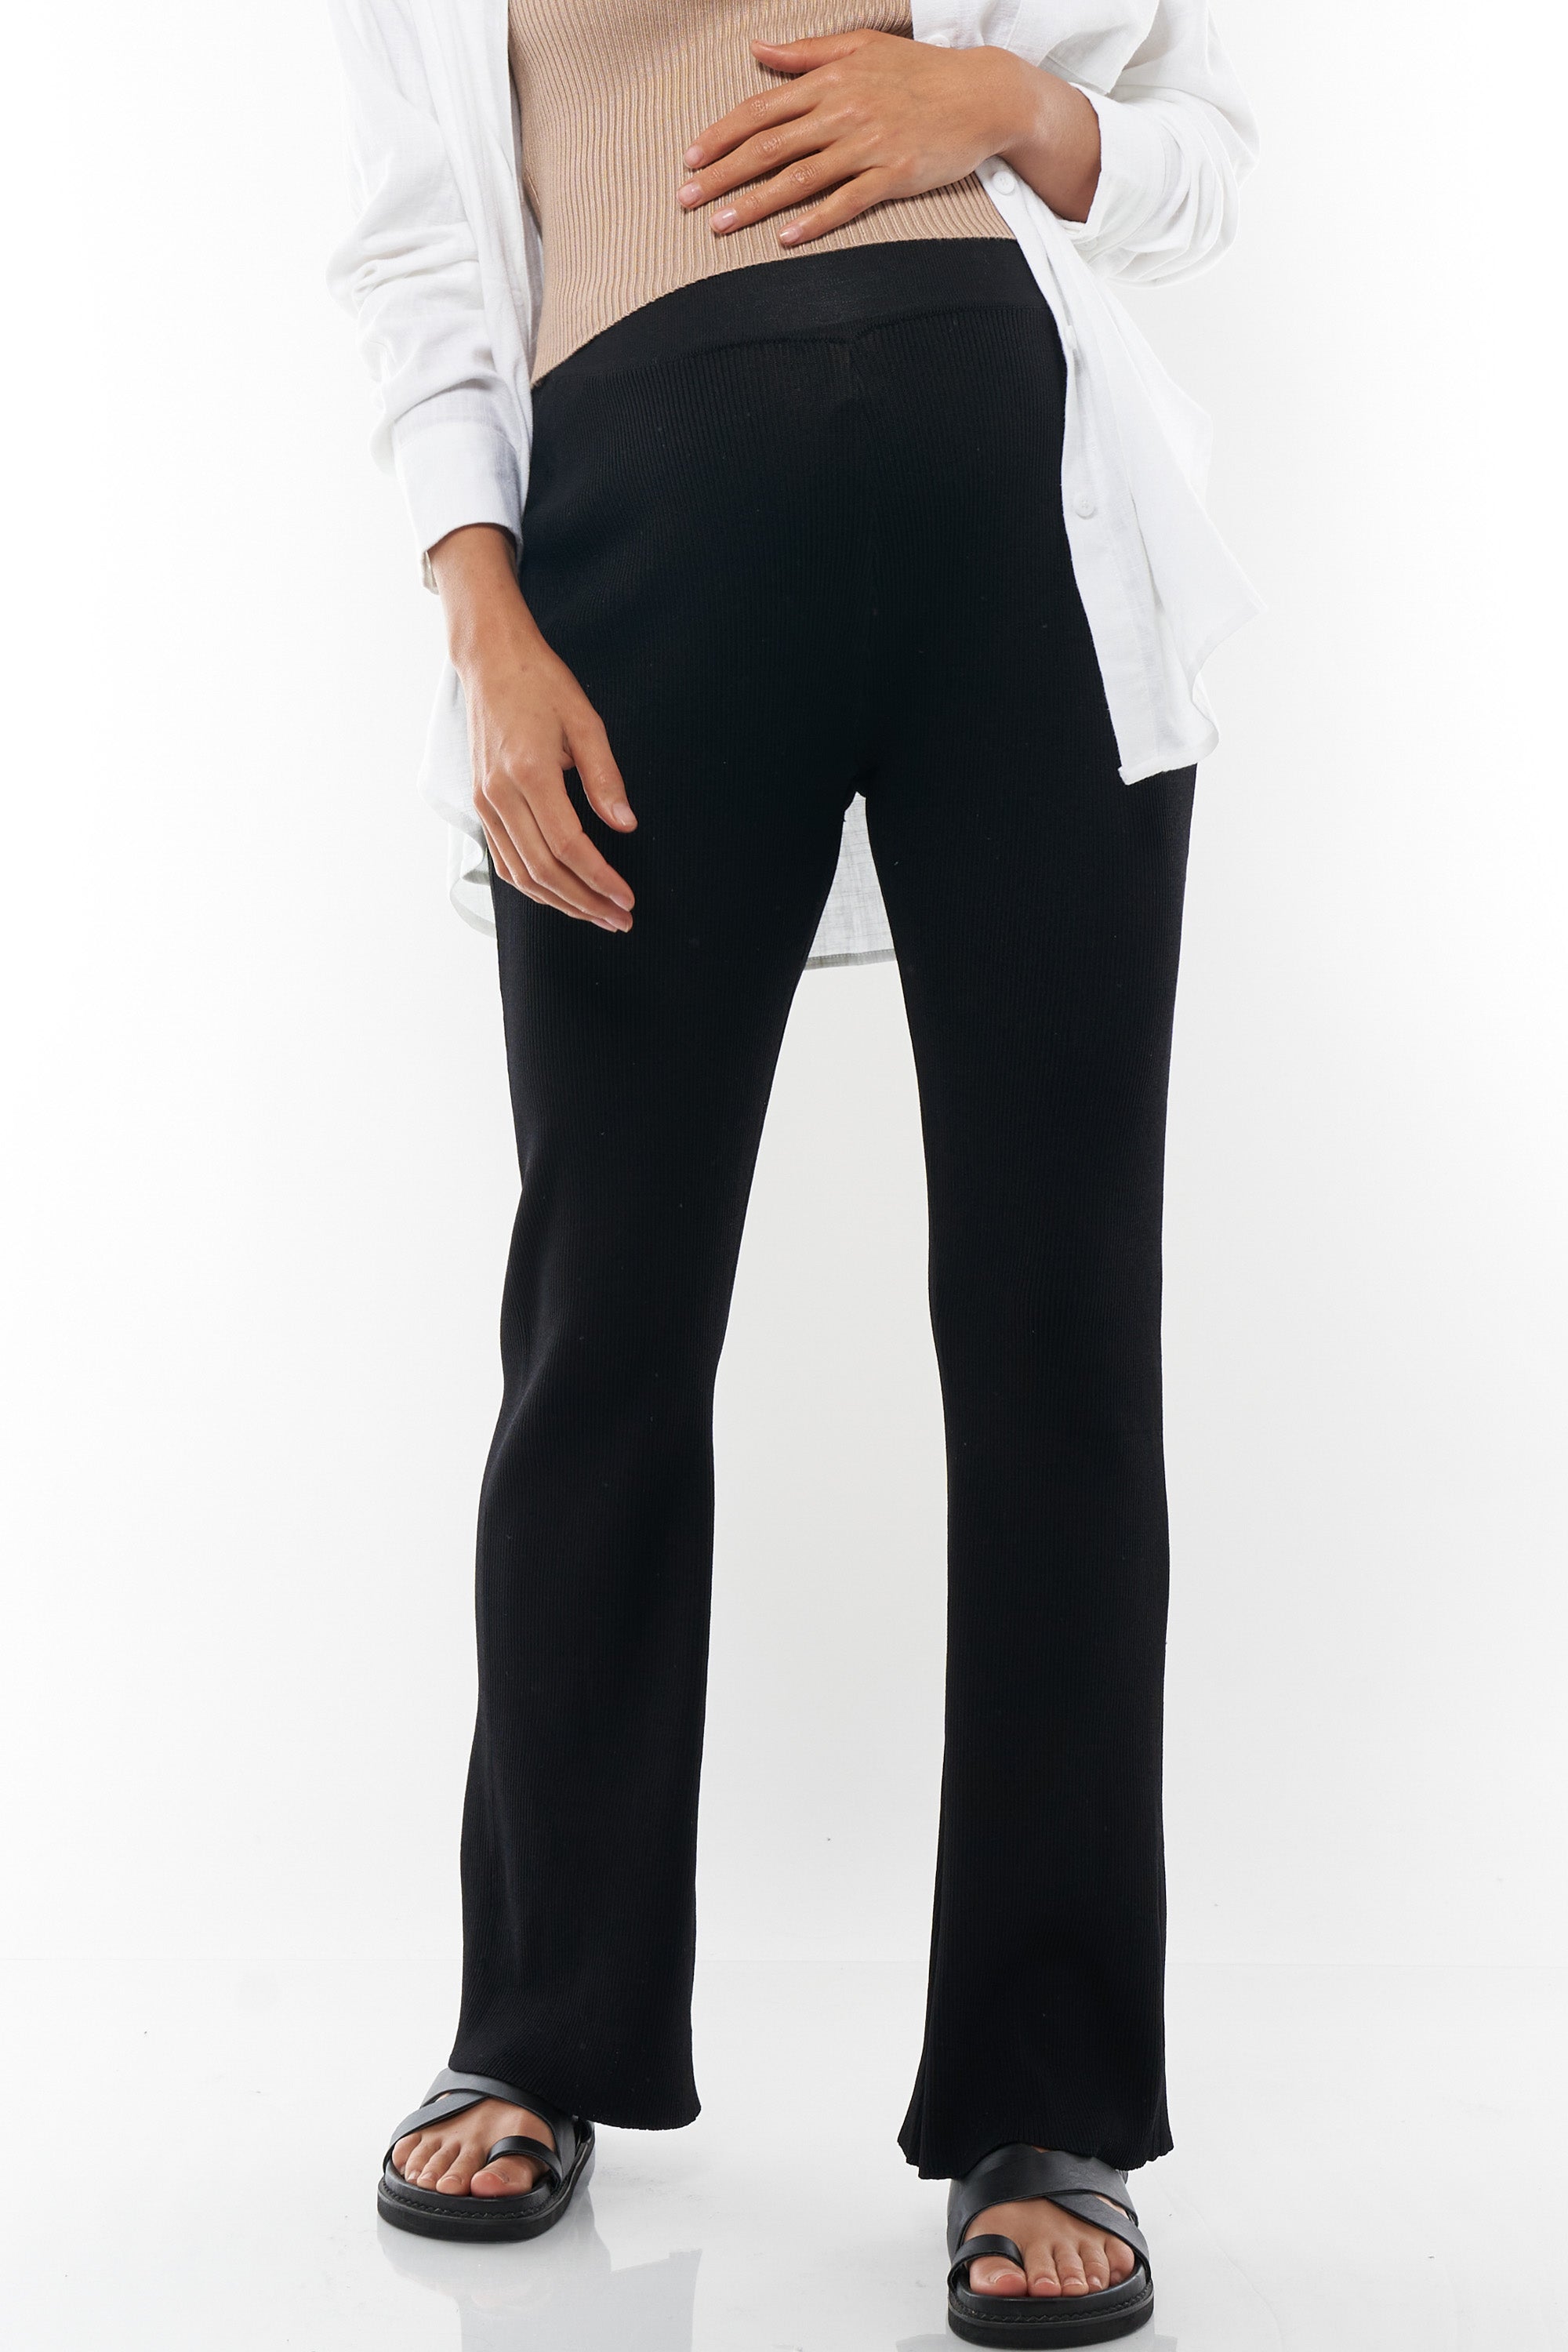 6058 Spring Summer Thin Black Maternity Straight Pants Across V Belly OL  Formal Work Laides Clothes for Pregnant Women Pregnancy